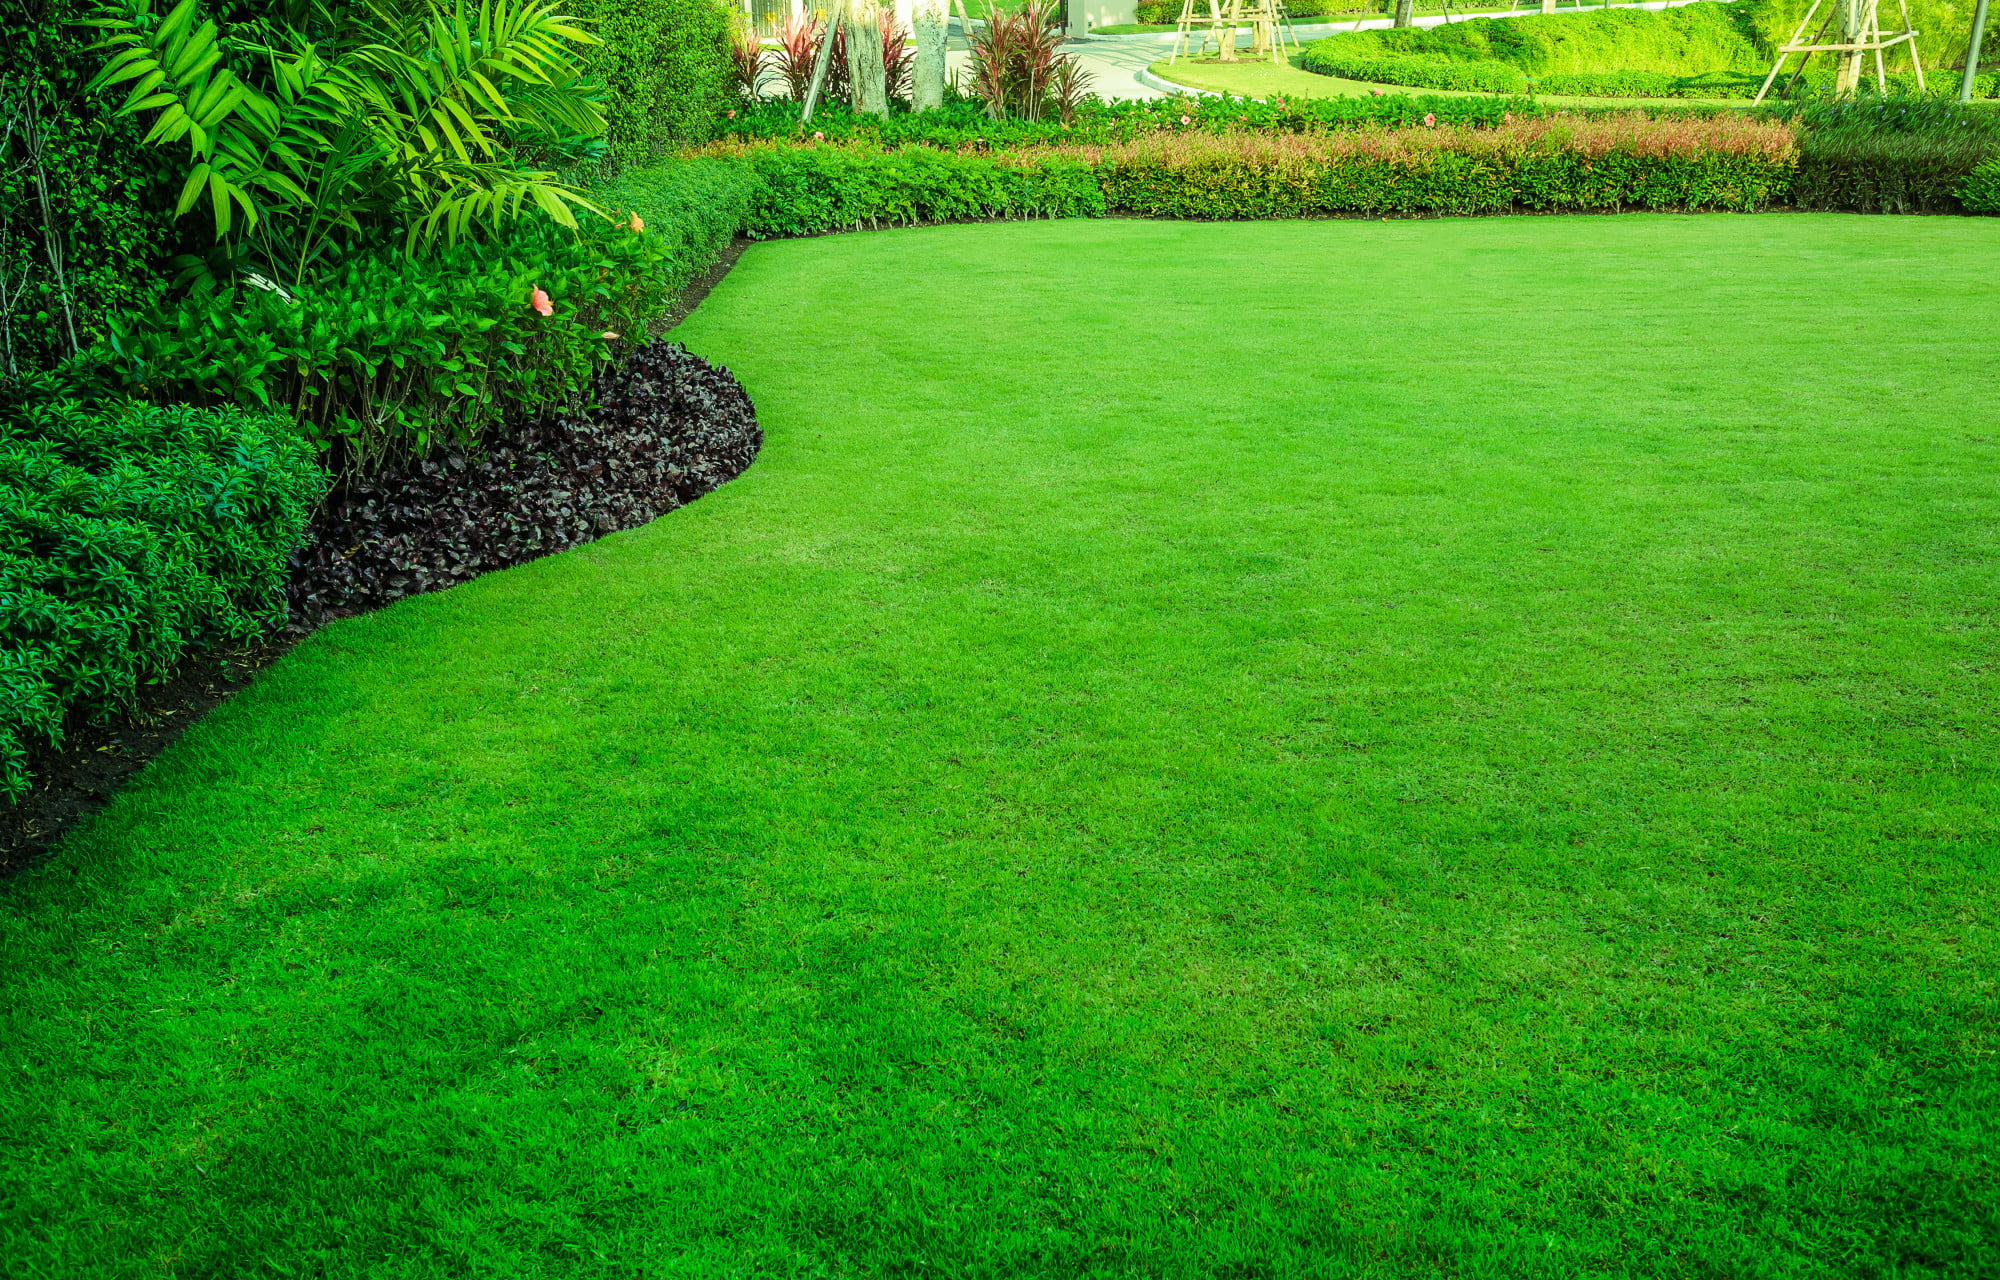 If you want to have a beautiful lawn, there are several things you need to do. Check out this guide for some tips on how to get green grass.